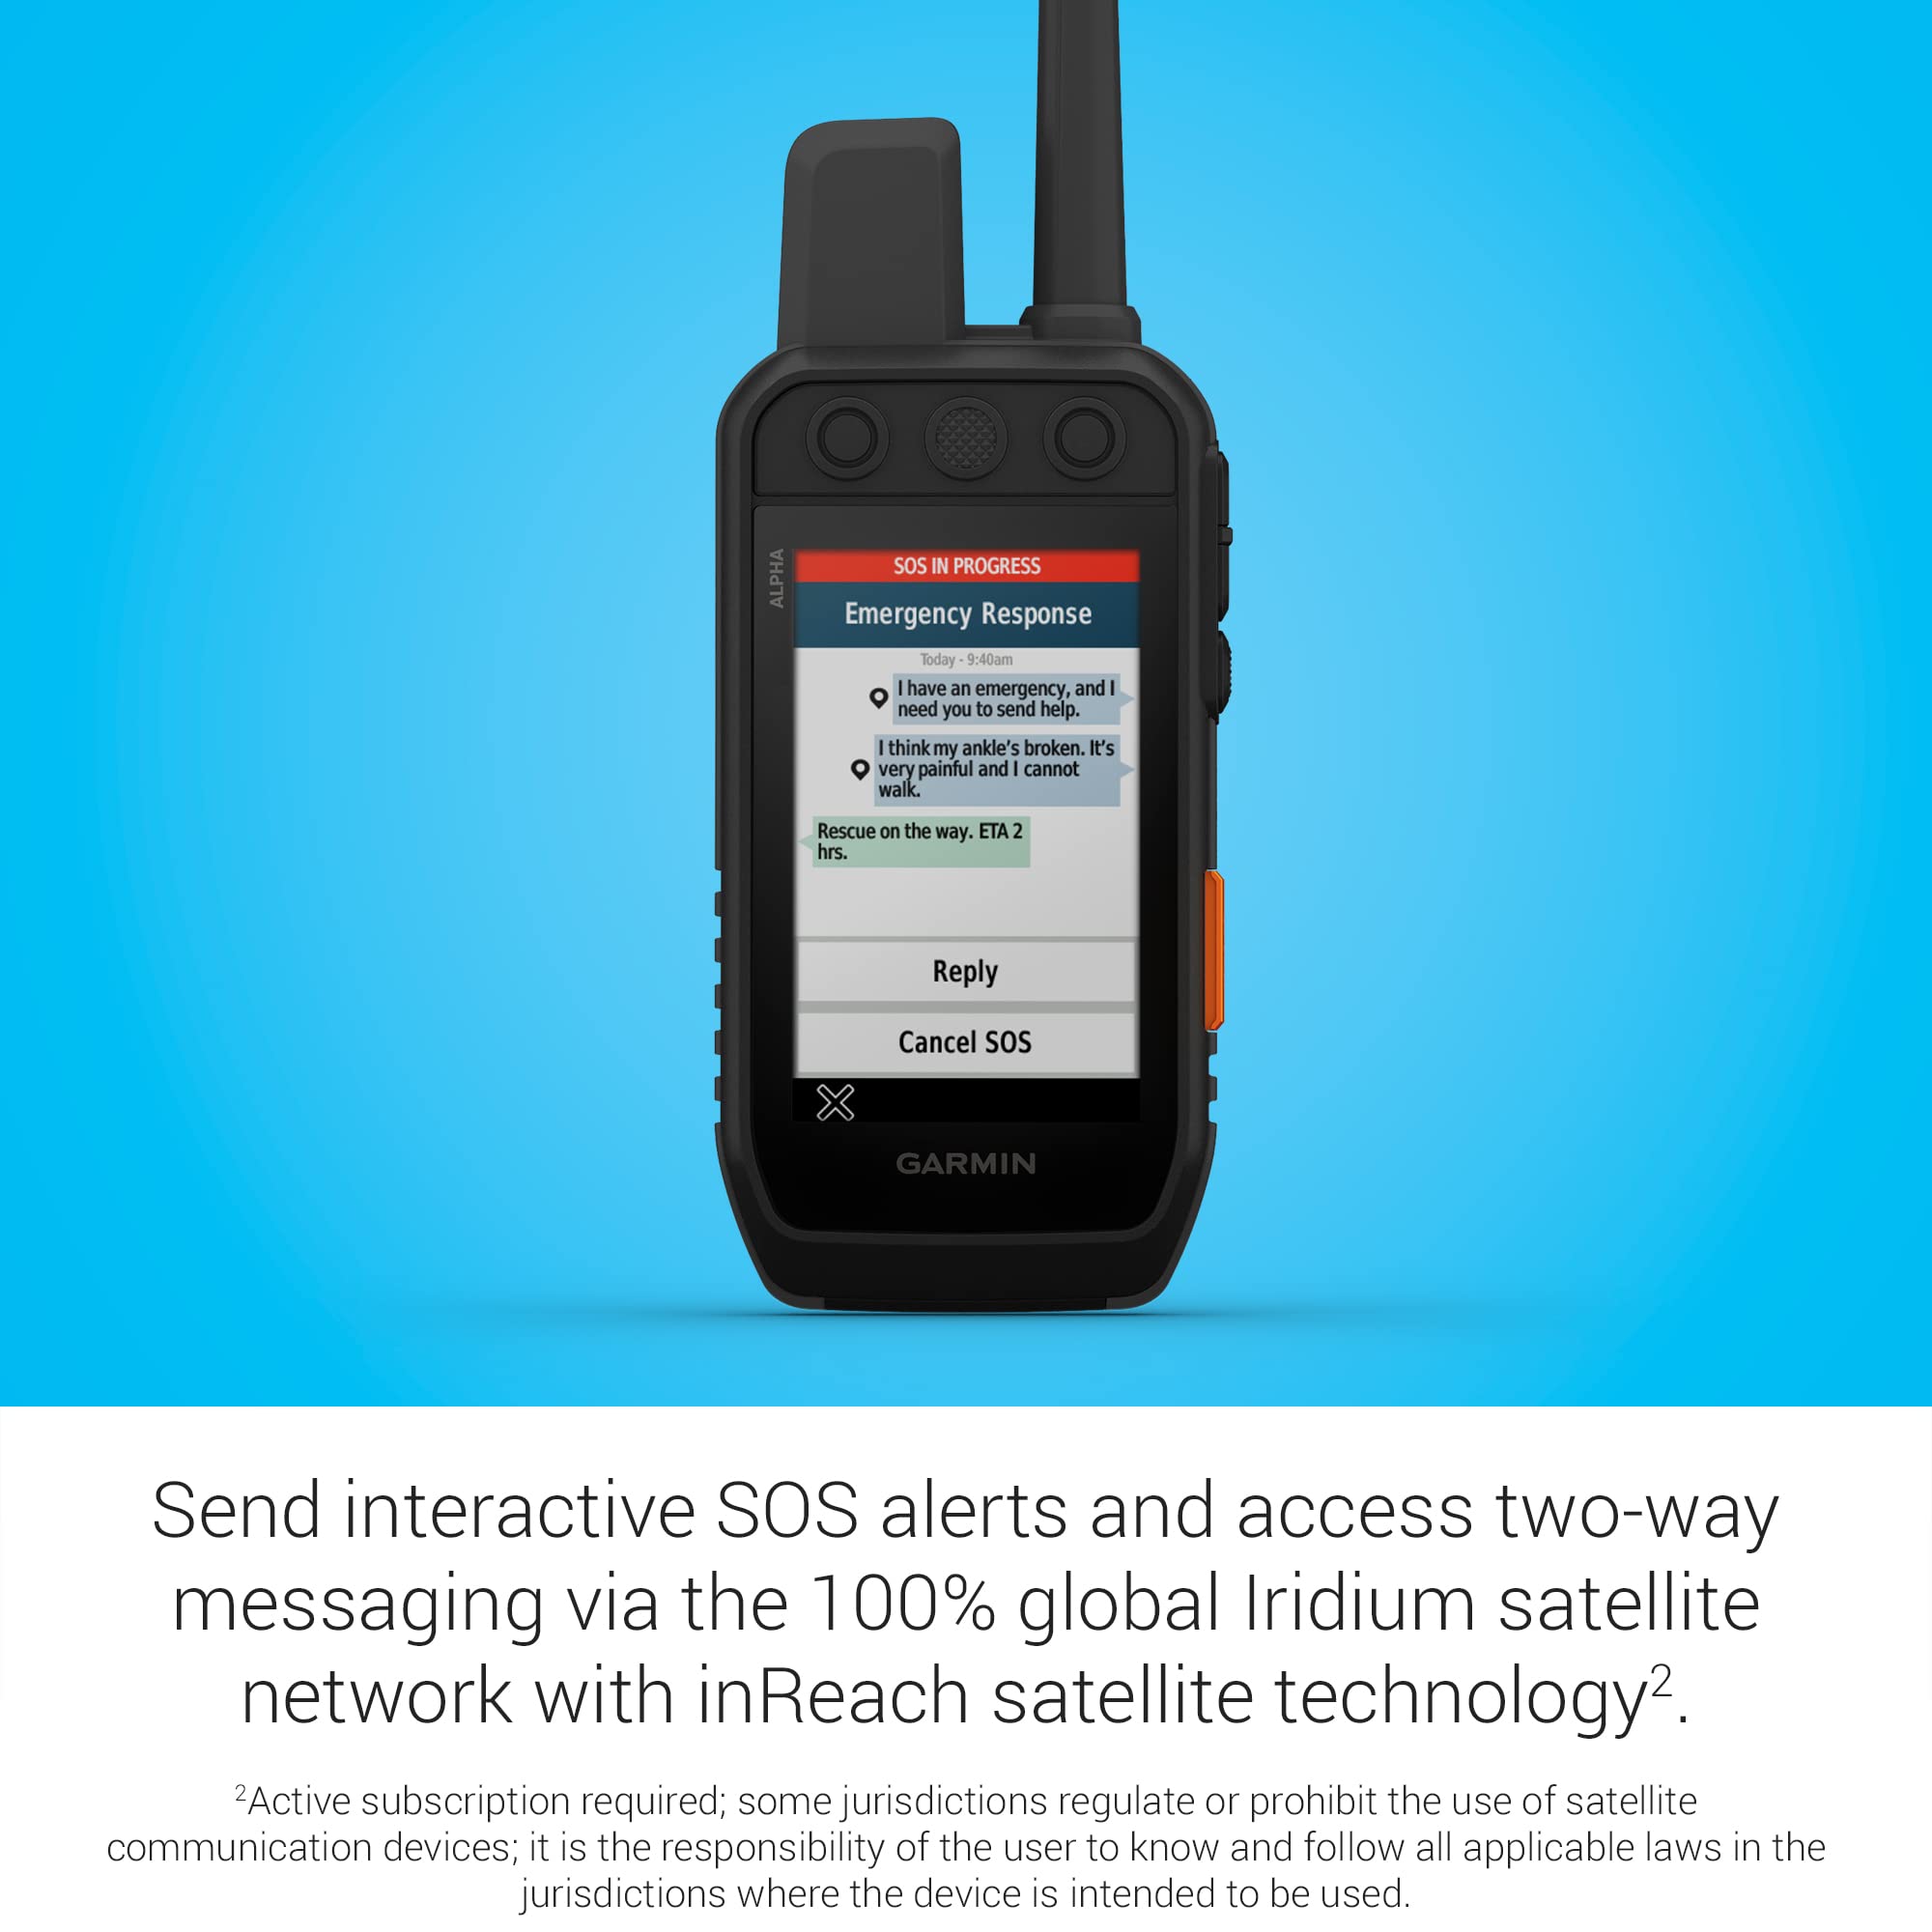 Garmin Alpha 300i Handheld, Advanced Tracking and Training Handheld with inReach® Technology